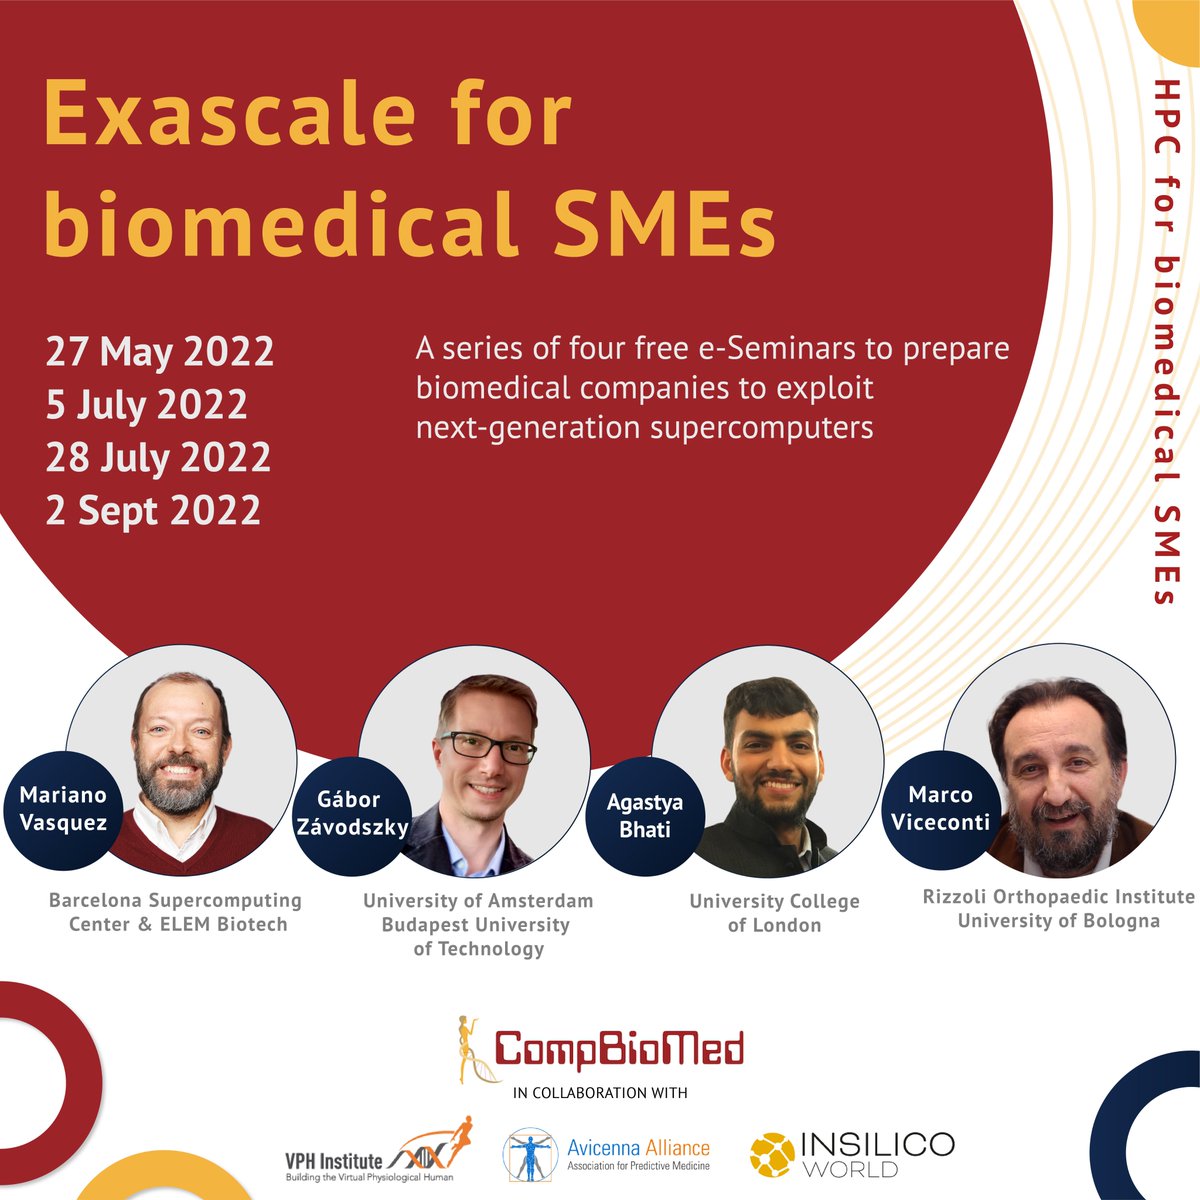 Series of free e-seminars on 'Exascale for biomedical SMEs' organized by the CompBioMed Centre of Excellence with the endorsement of the Avicenna Alliance and VPH Institute. Info and Registration: bit.ly/3KvaZvs